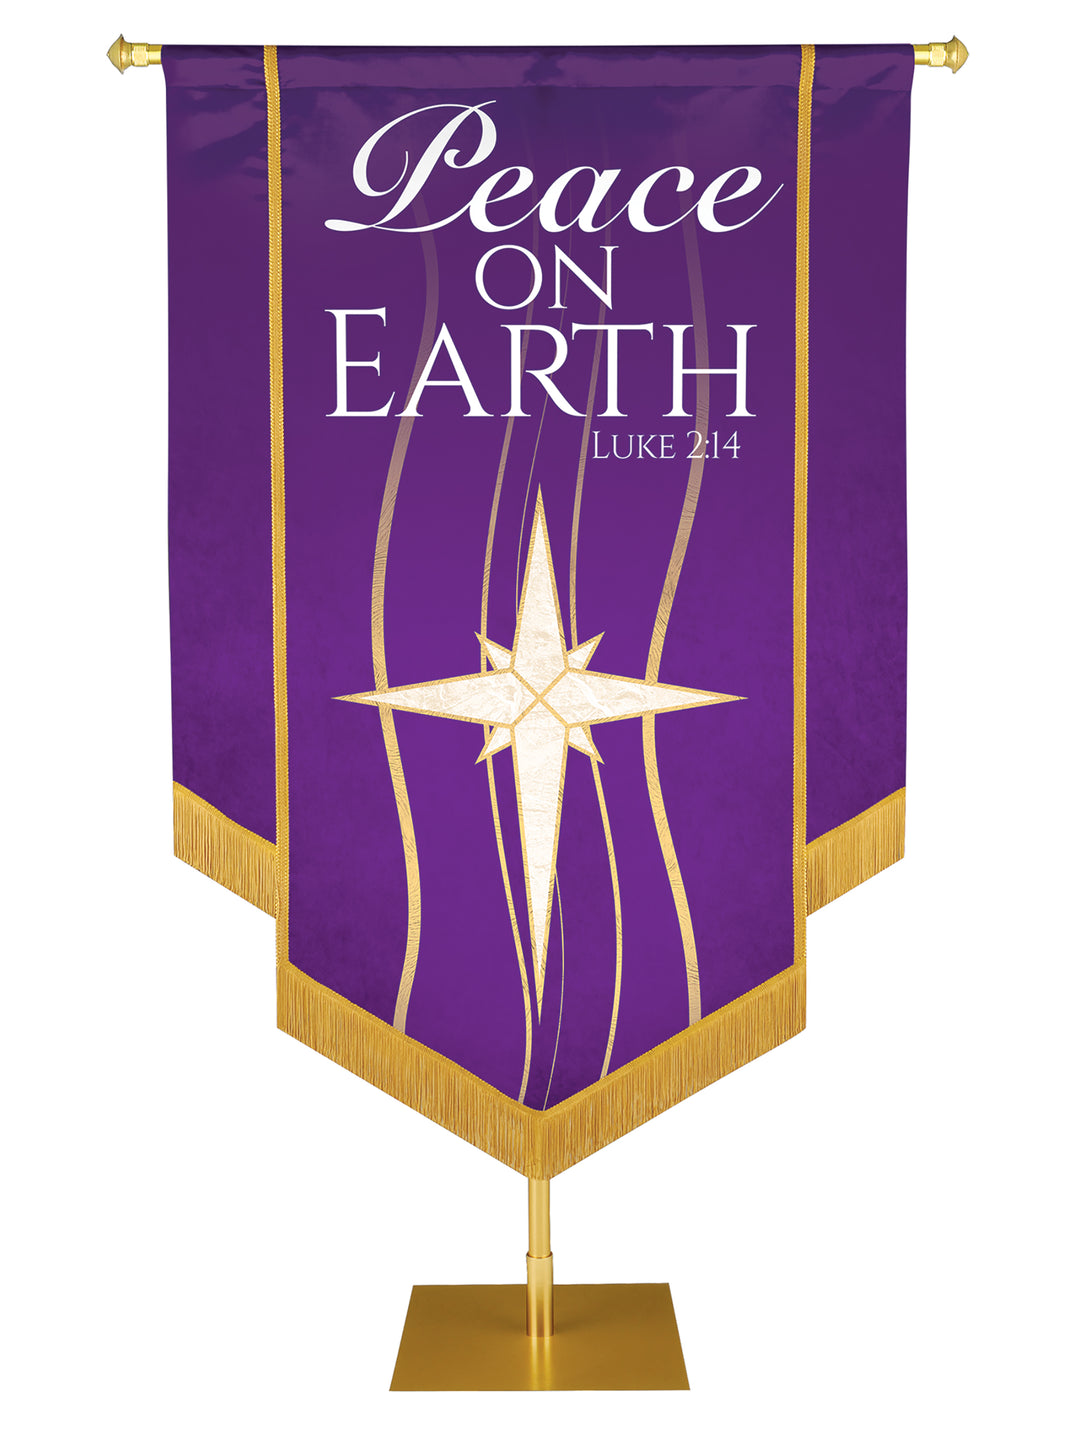 Experiencing God Star, Peace on Earth Embellished Banner - Handcrafted Banners - PraiseBanners